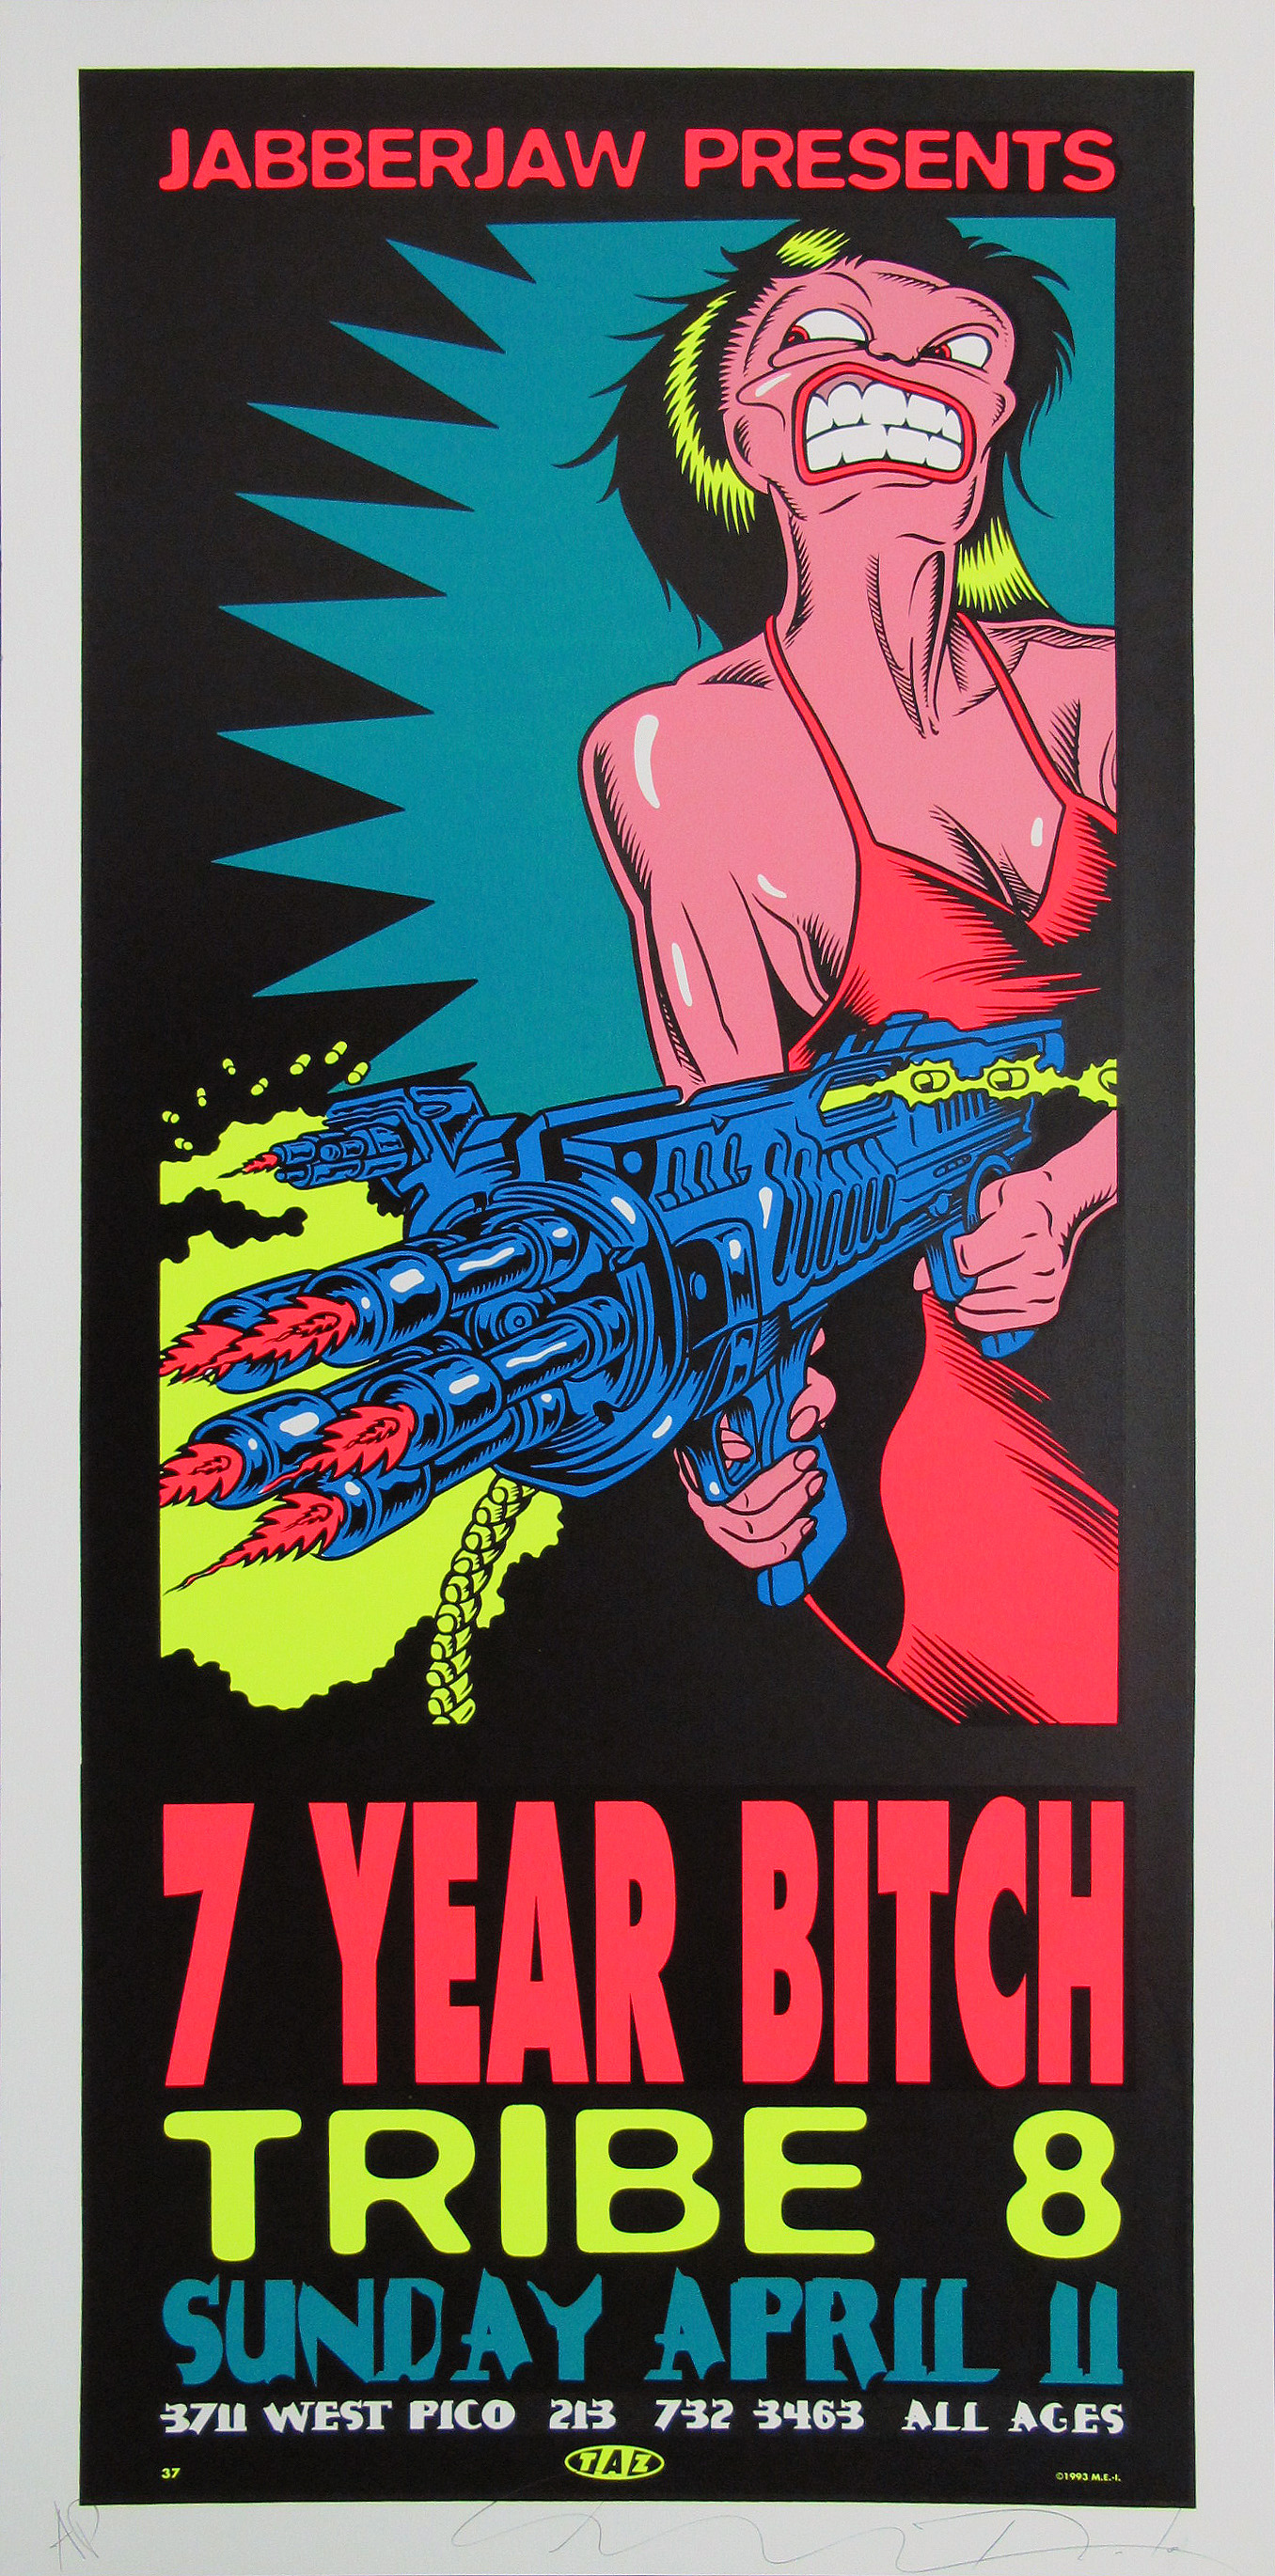 7 Year Bitch Concert Poster